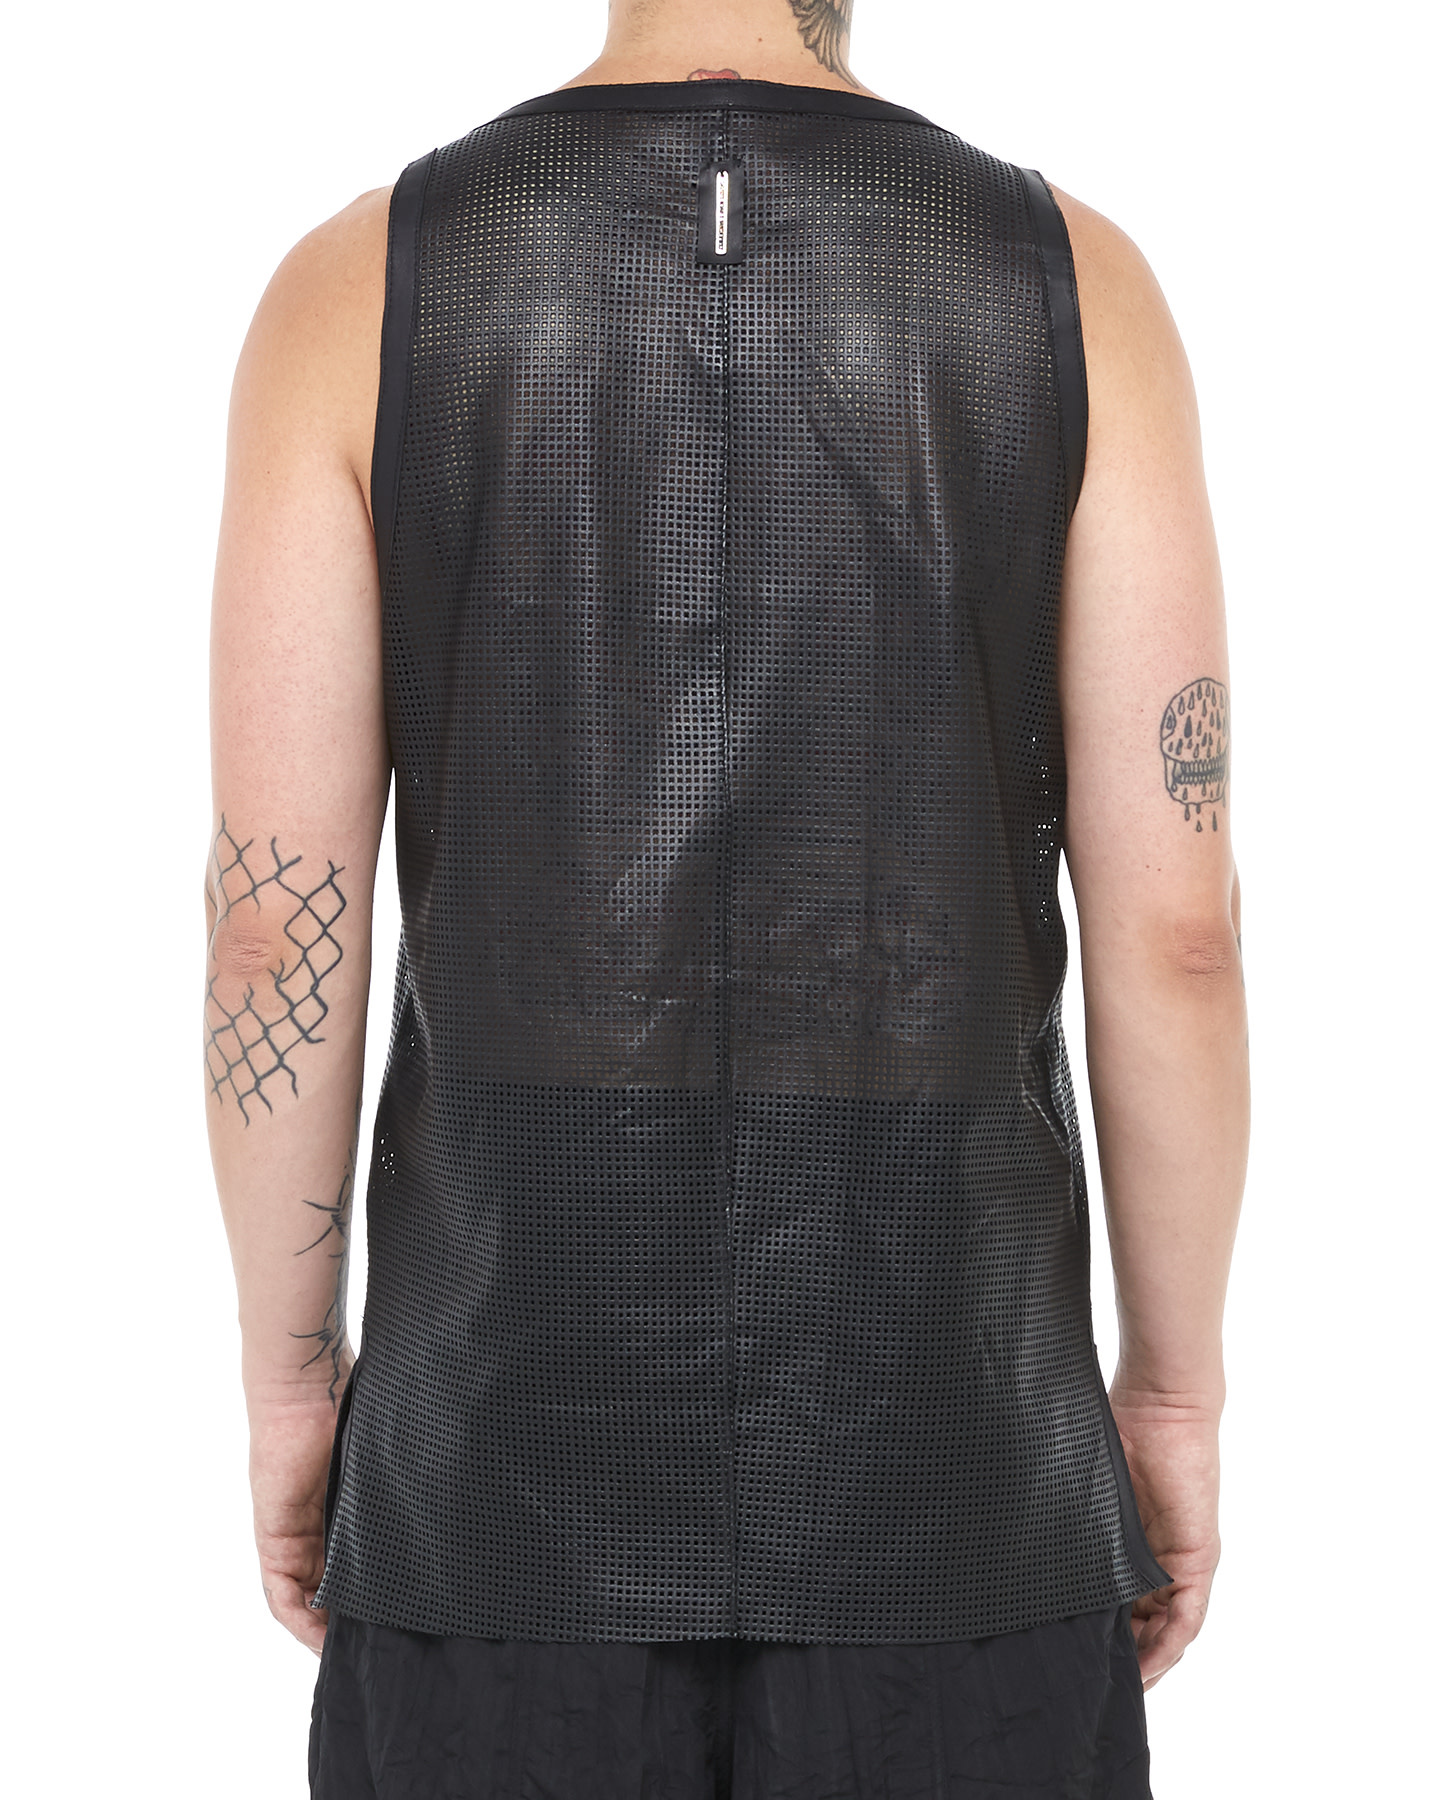 Perforated Leather Tank Top by David's Road